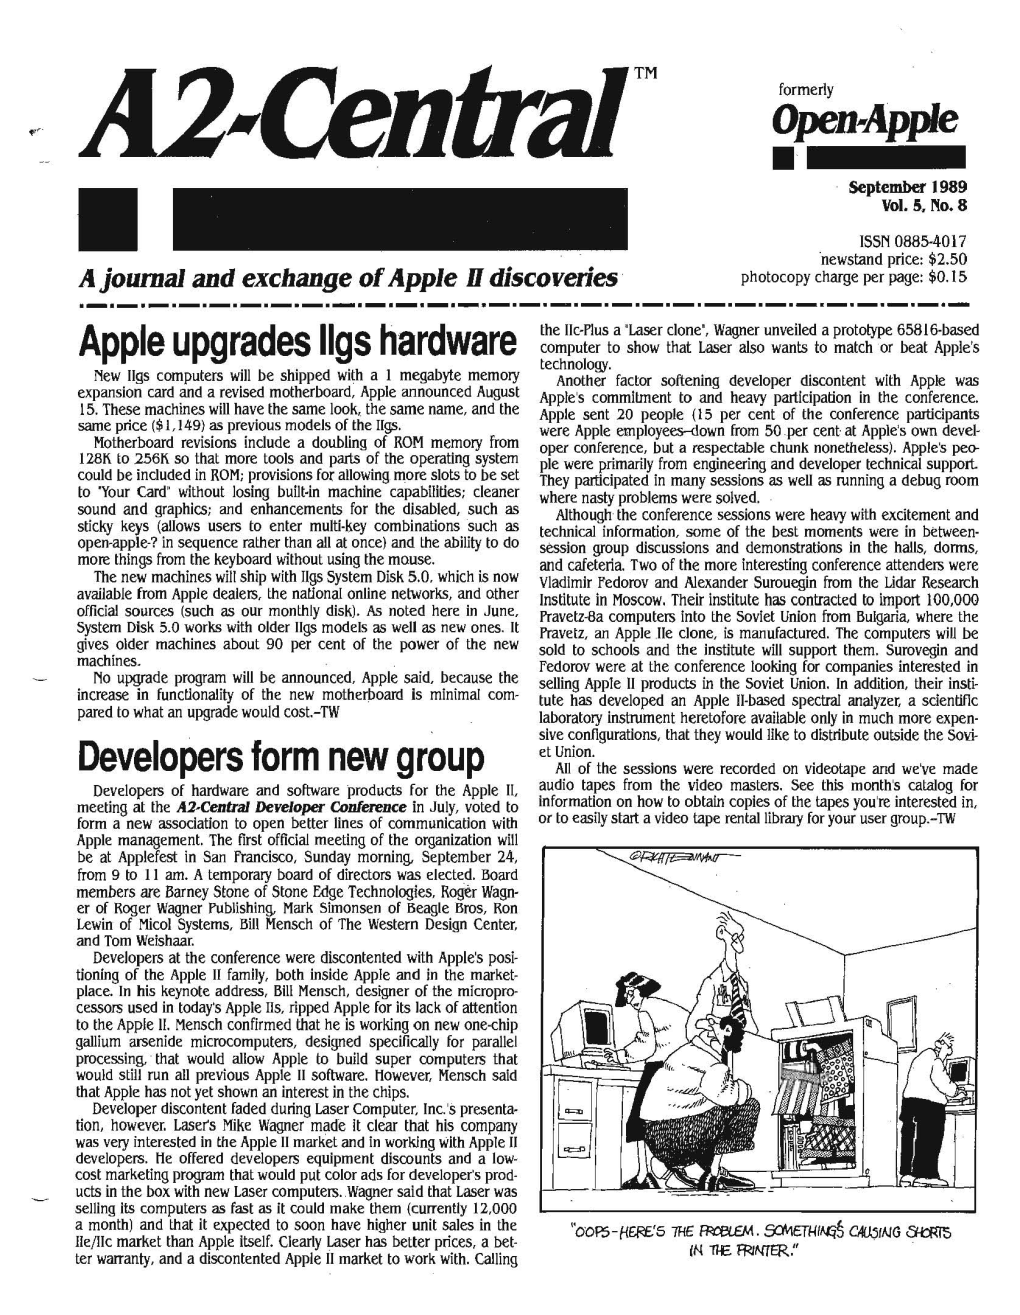 Apple Upgrades Iigs Hardware Developers Form New Group